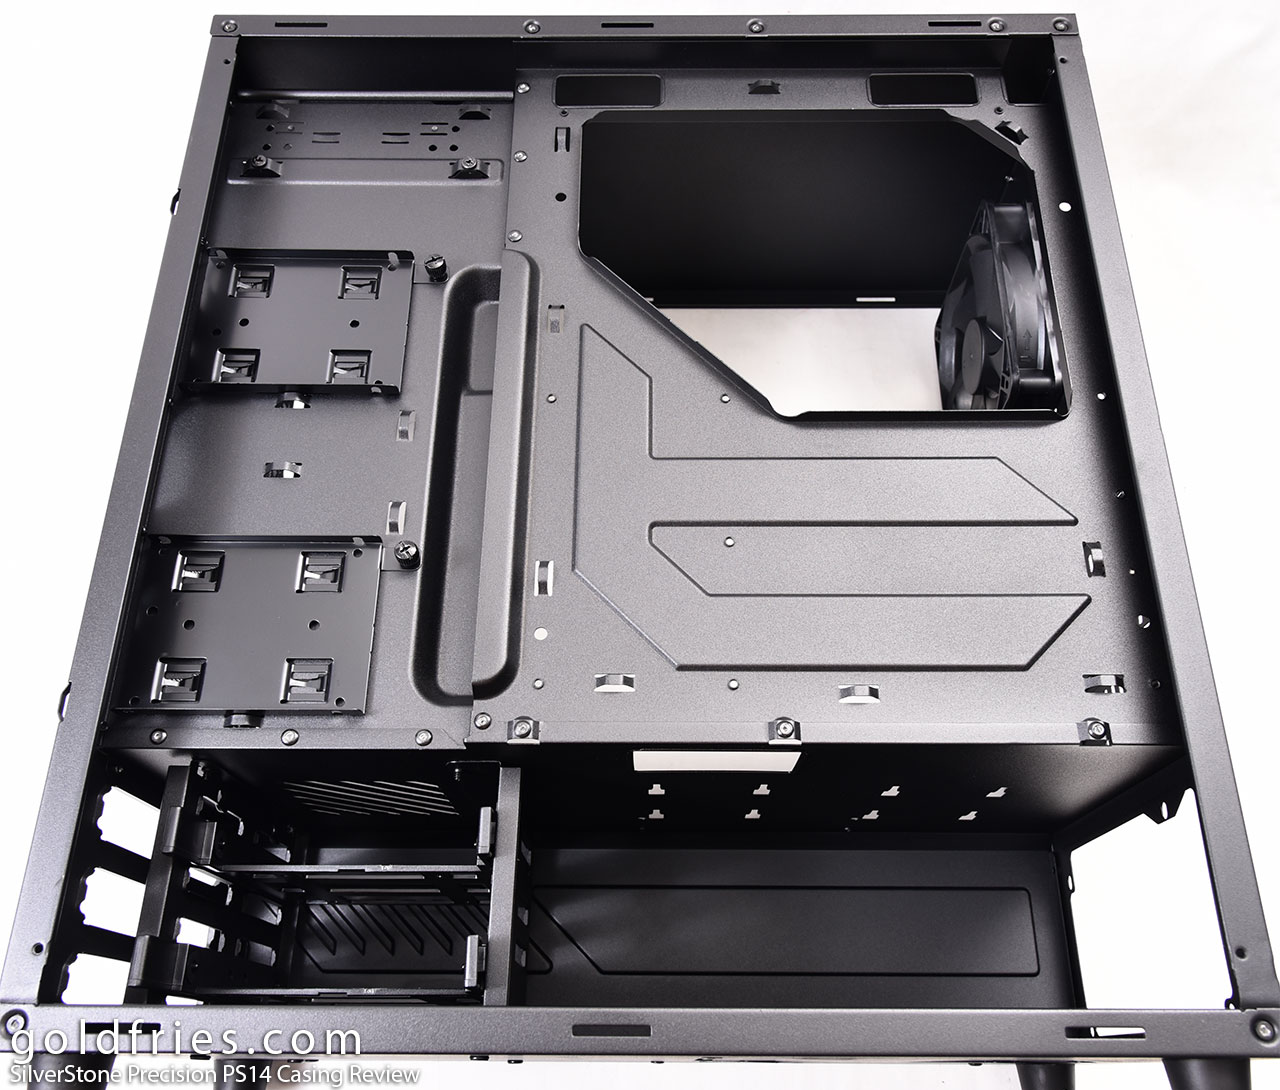 SilverStone Precision PS14 Casing Review